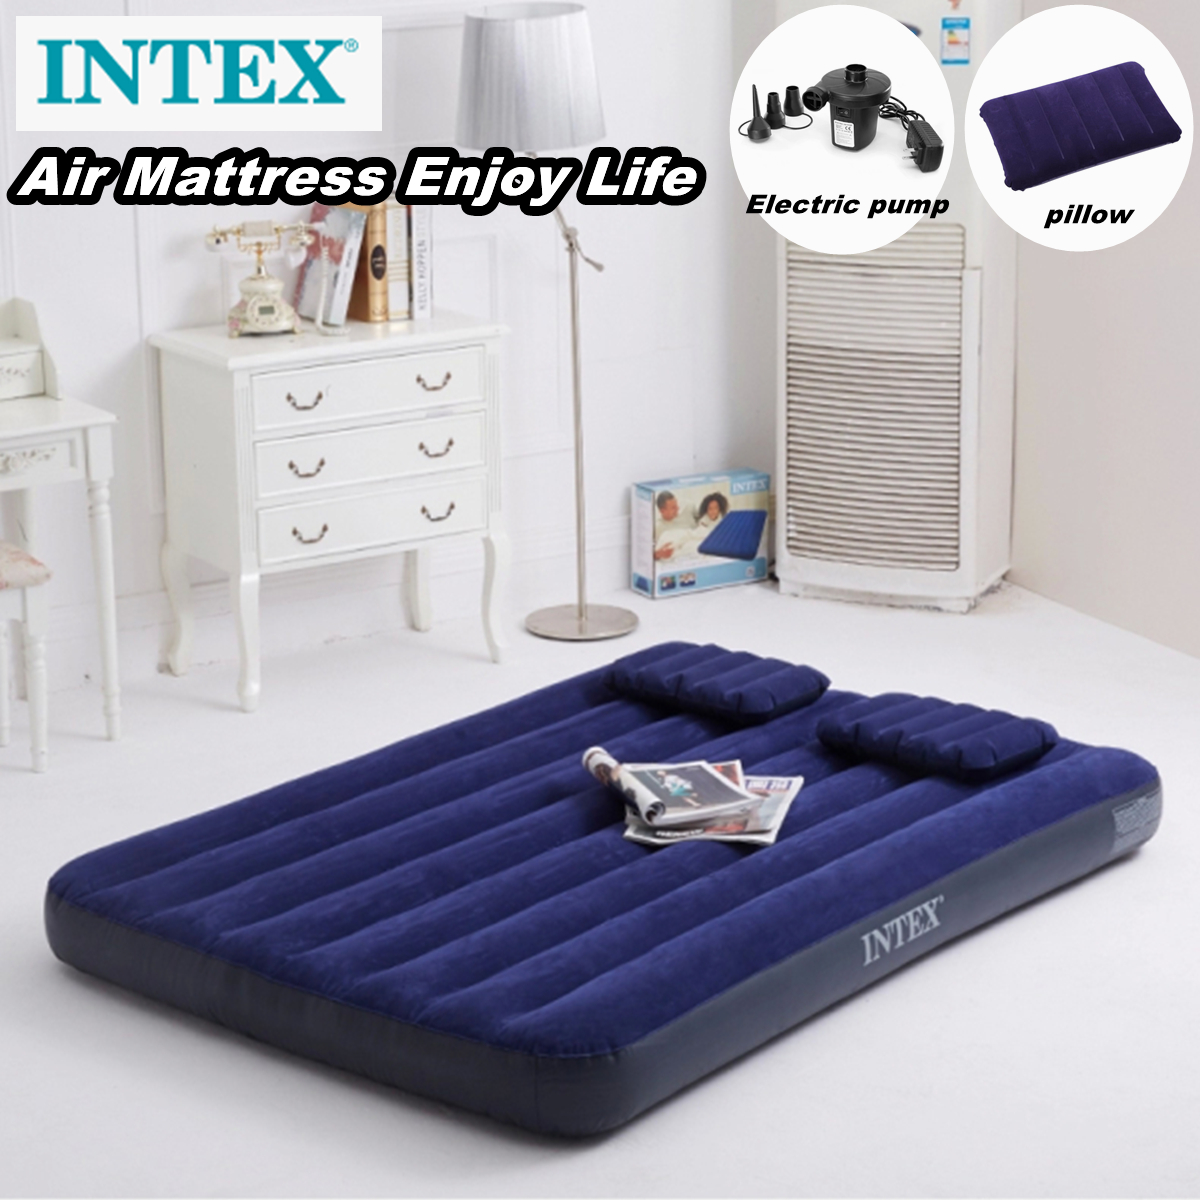 【 Ready Stock ? COD 】Surbluesky INTEX 99CM / 183CM Tilam Angin Camping Bed Inflatable Air Bed Mattress Queen Size Thicken 25CM ( Free Electric Pump )